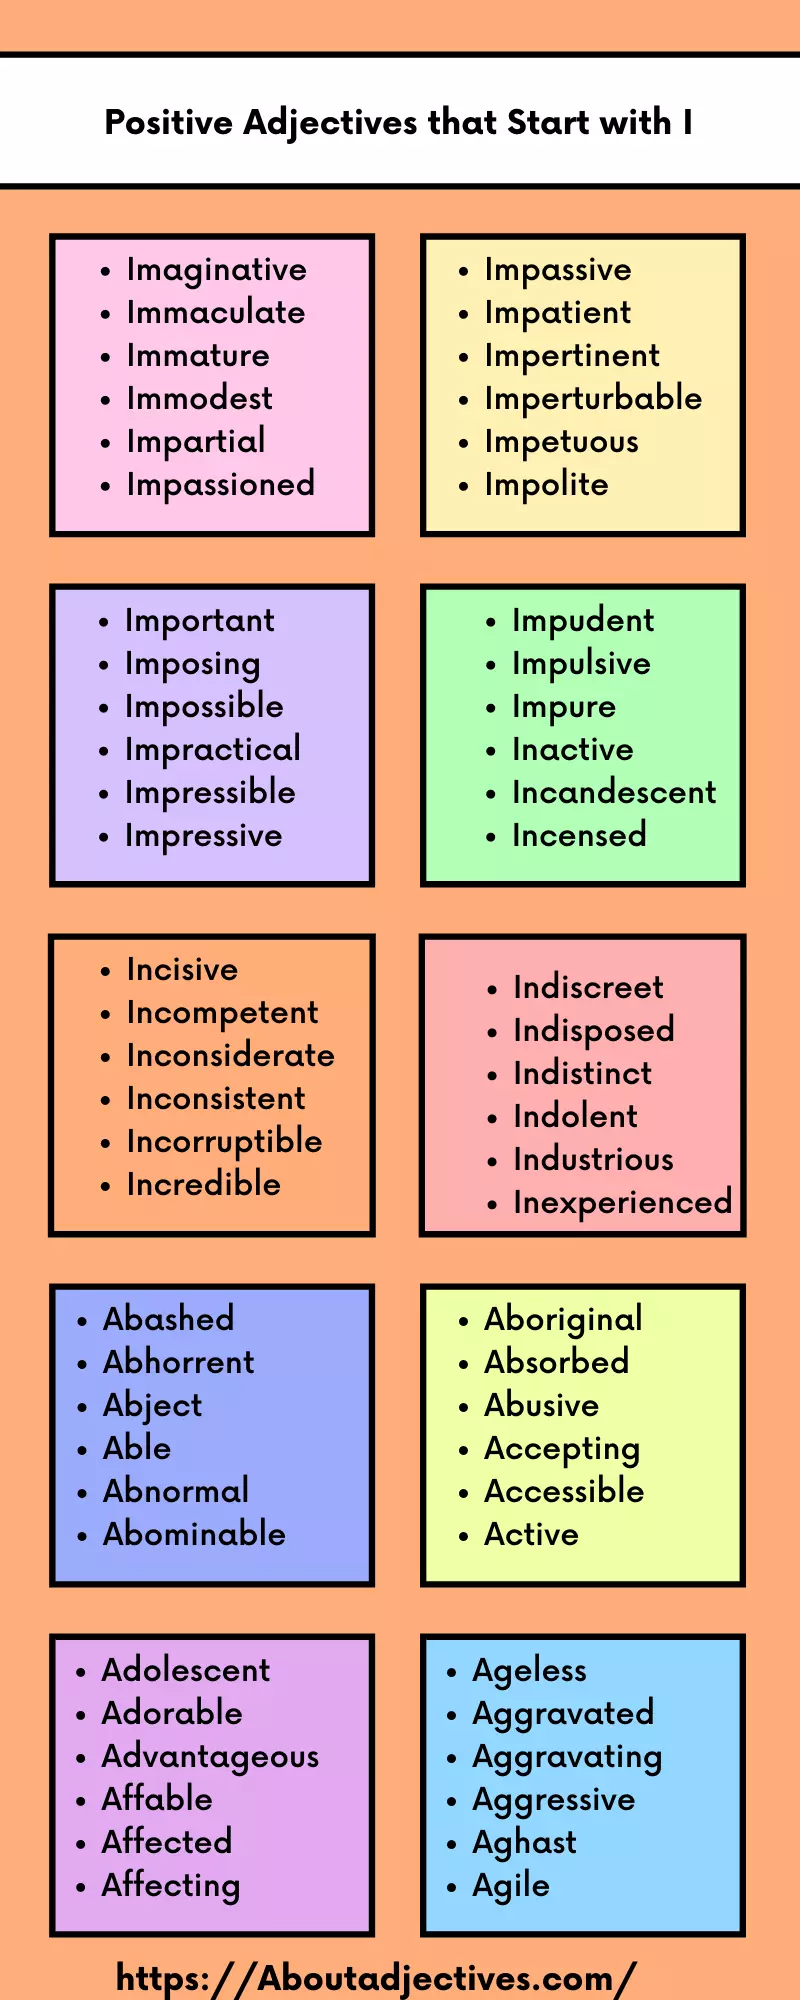 Adjectives that Start with I to describe a person